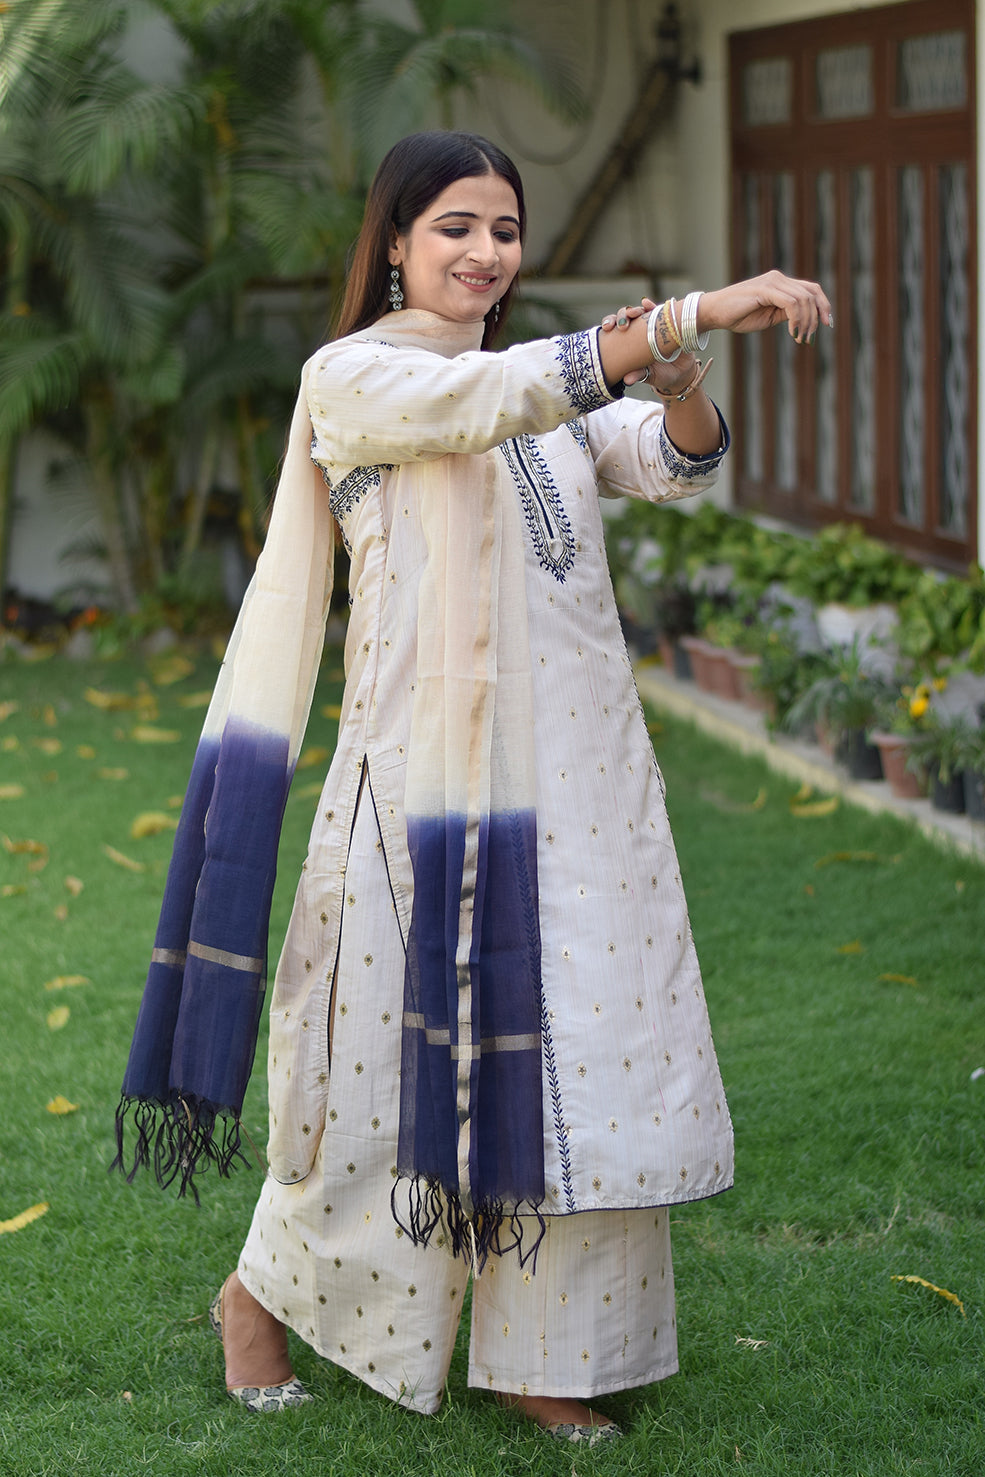 A traditional Indian outfit consisting of an Off-White Silk Kurta worn by a woman.